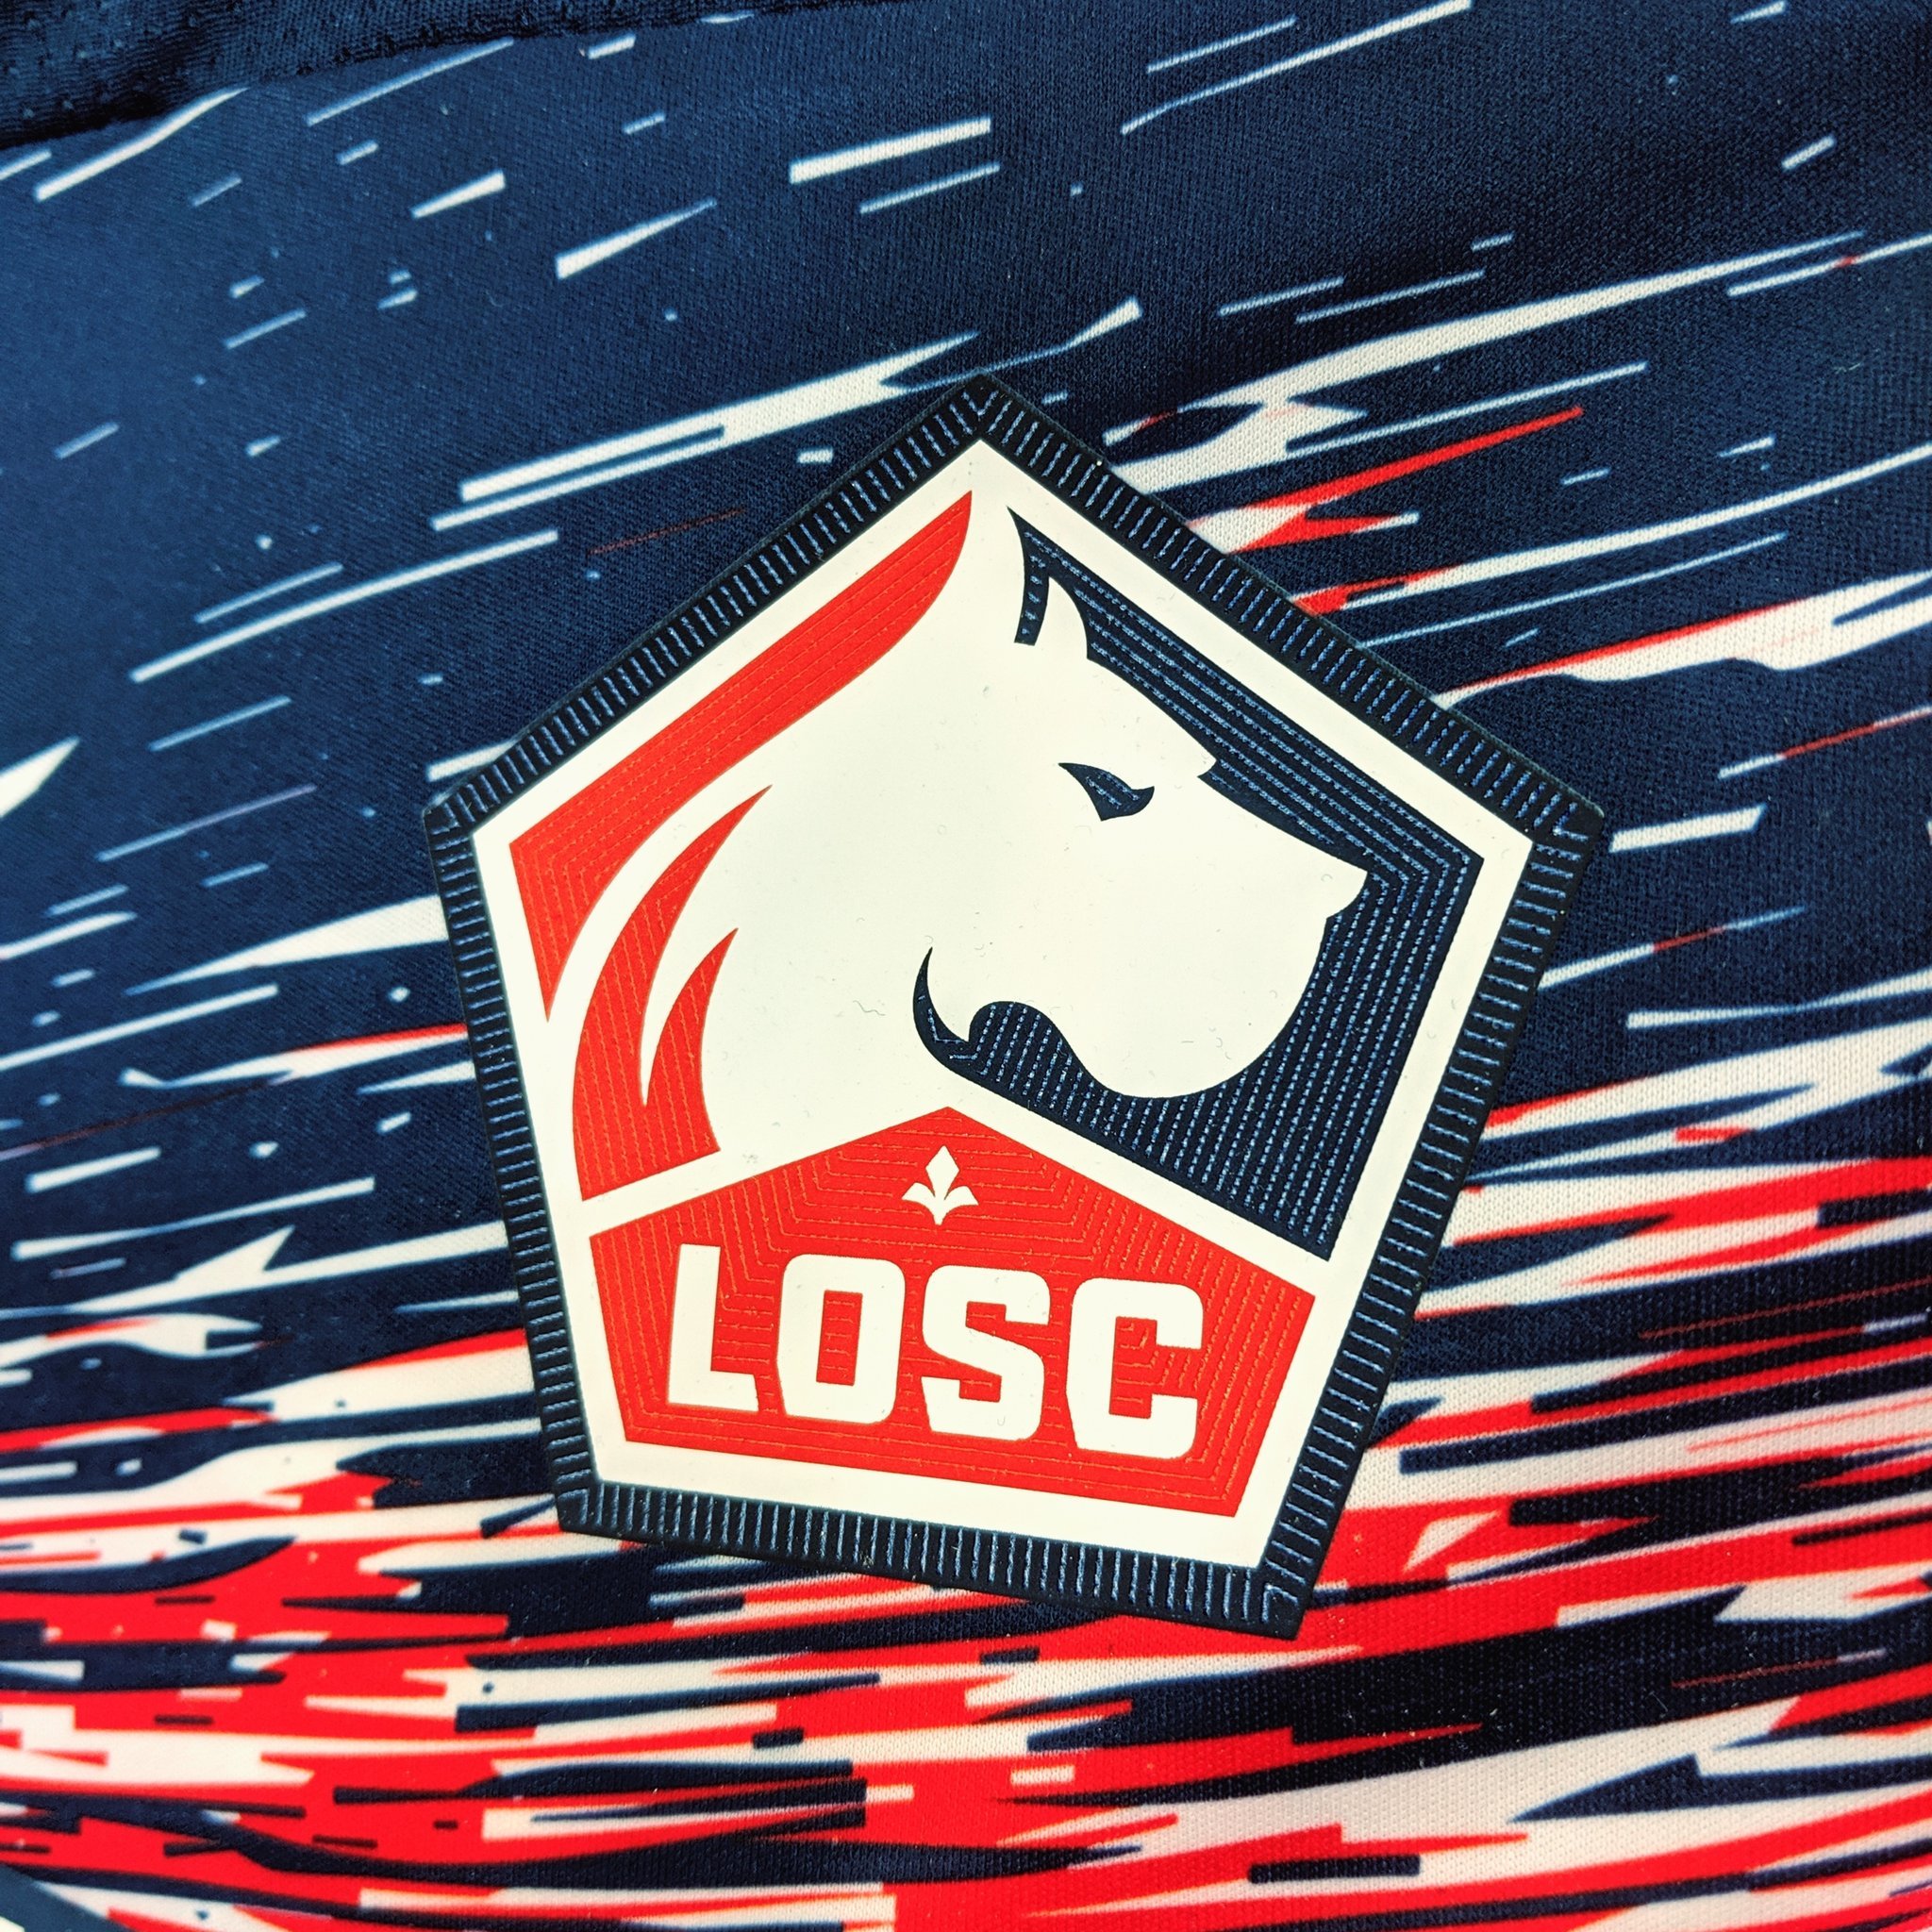 Classic Football Shirts Alert: The new Lille home kit is out What do you think? #LOSC #NBFootball